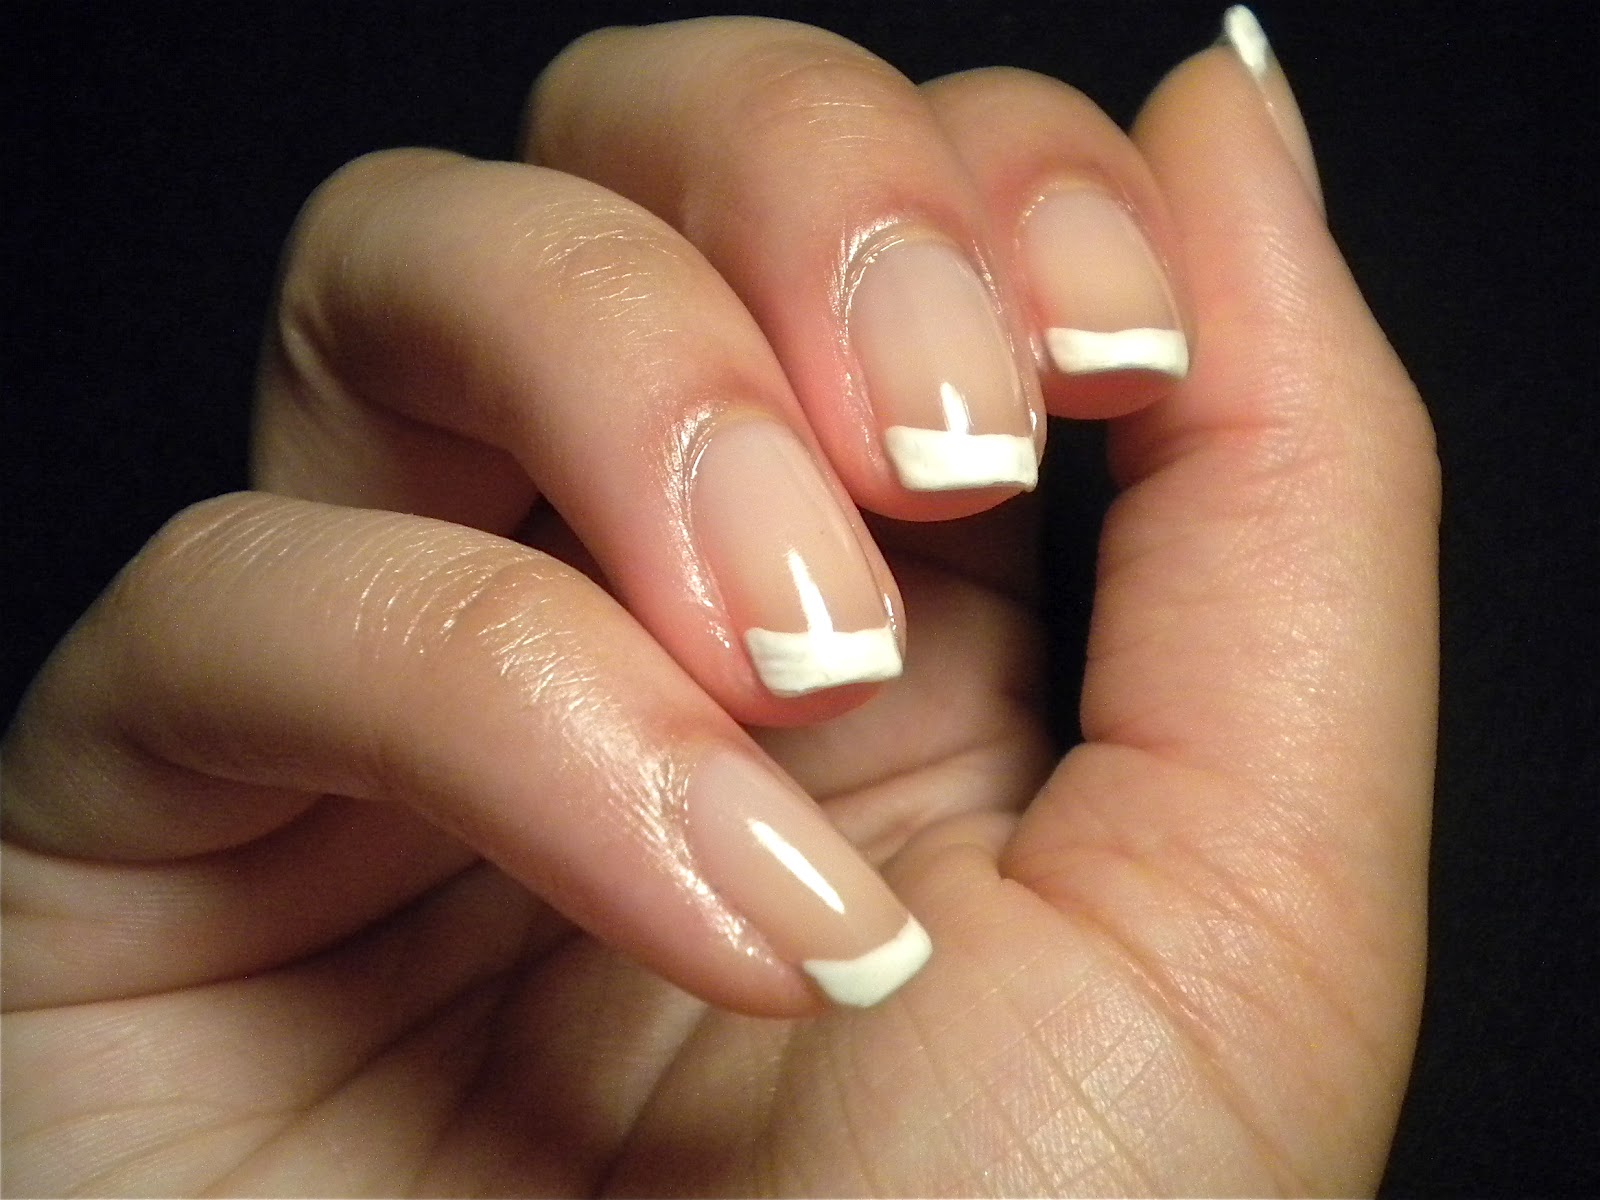 1. "French Manicure Nail Art Ideas: The Best Designs for a Classic Look" - wide 8